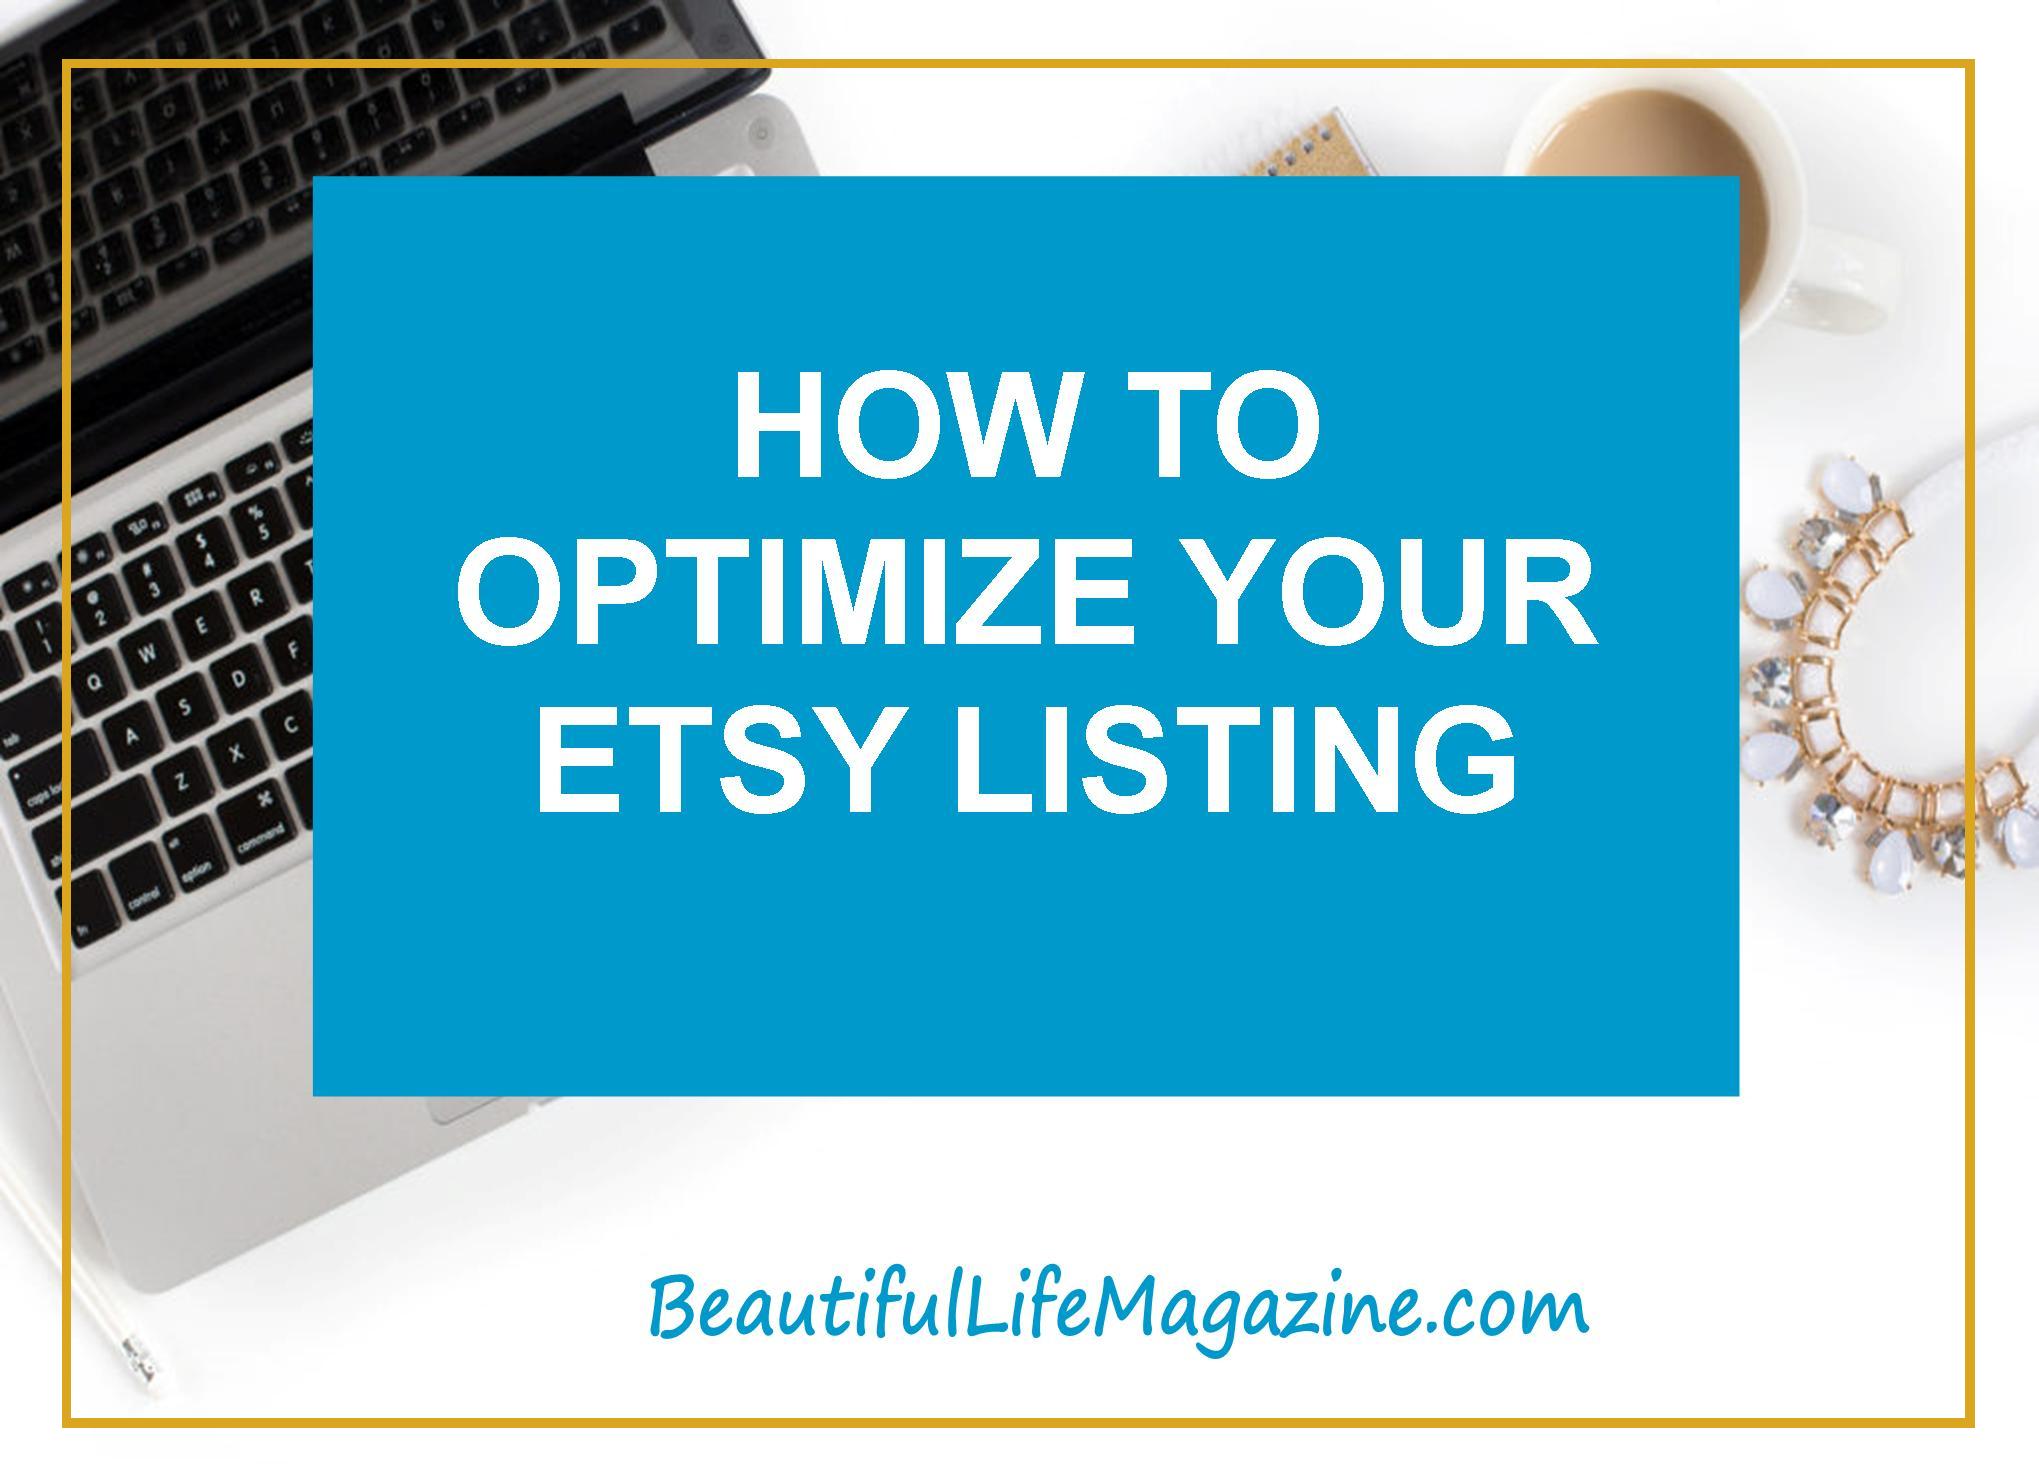 They key is to determine if the keywords you’re using are best or other keywords may be better for you Etsy Listing. Google offers its handy, Keyword Tool.